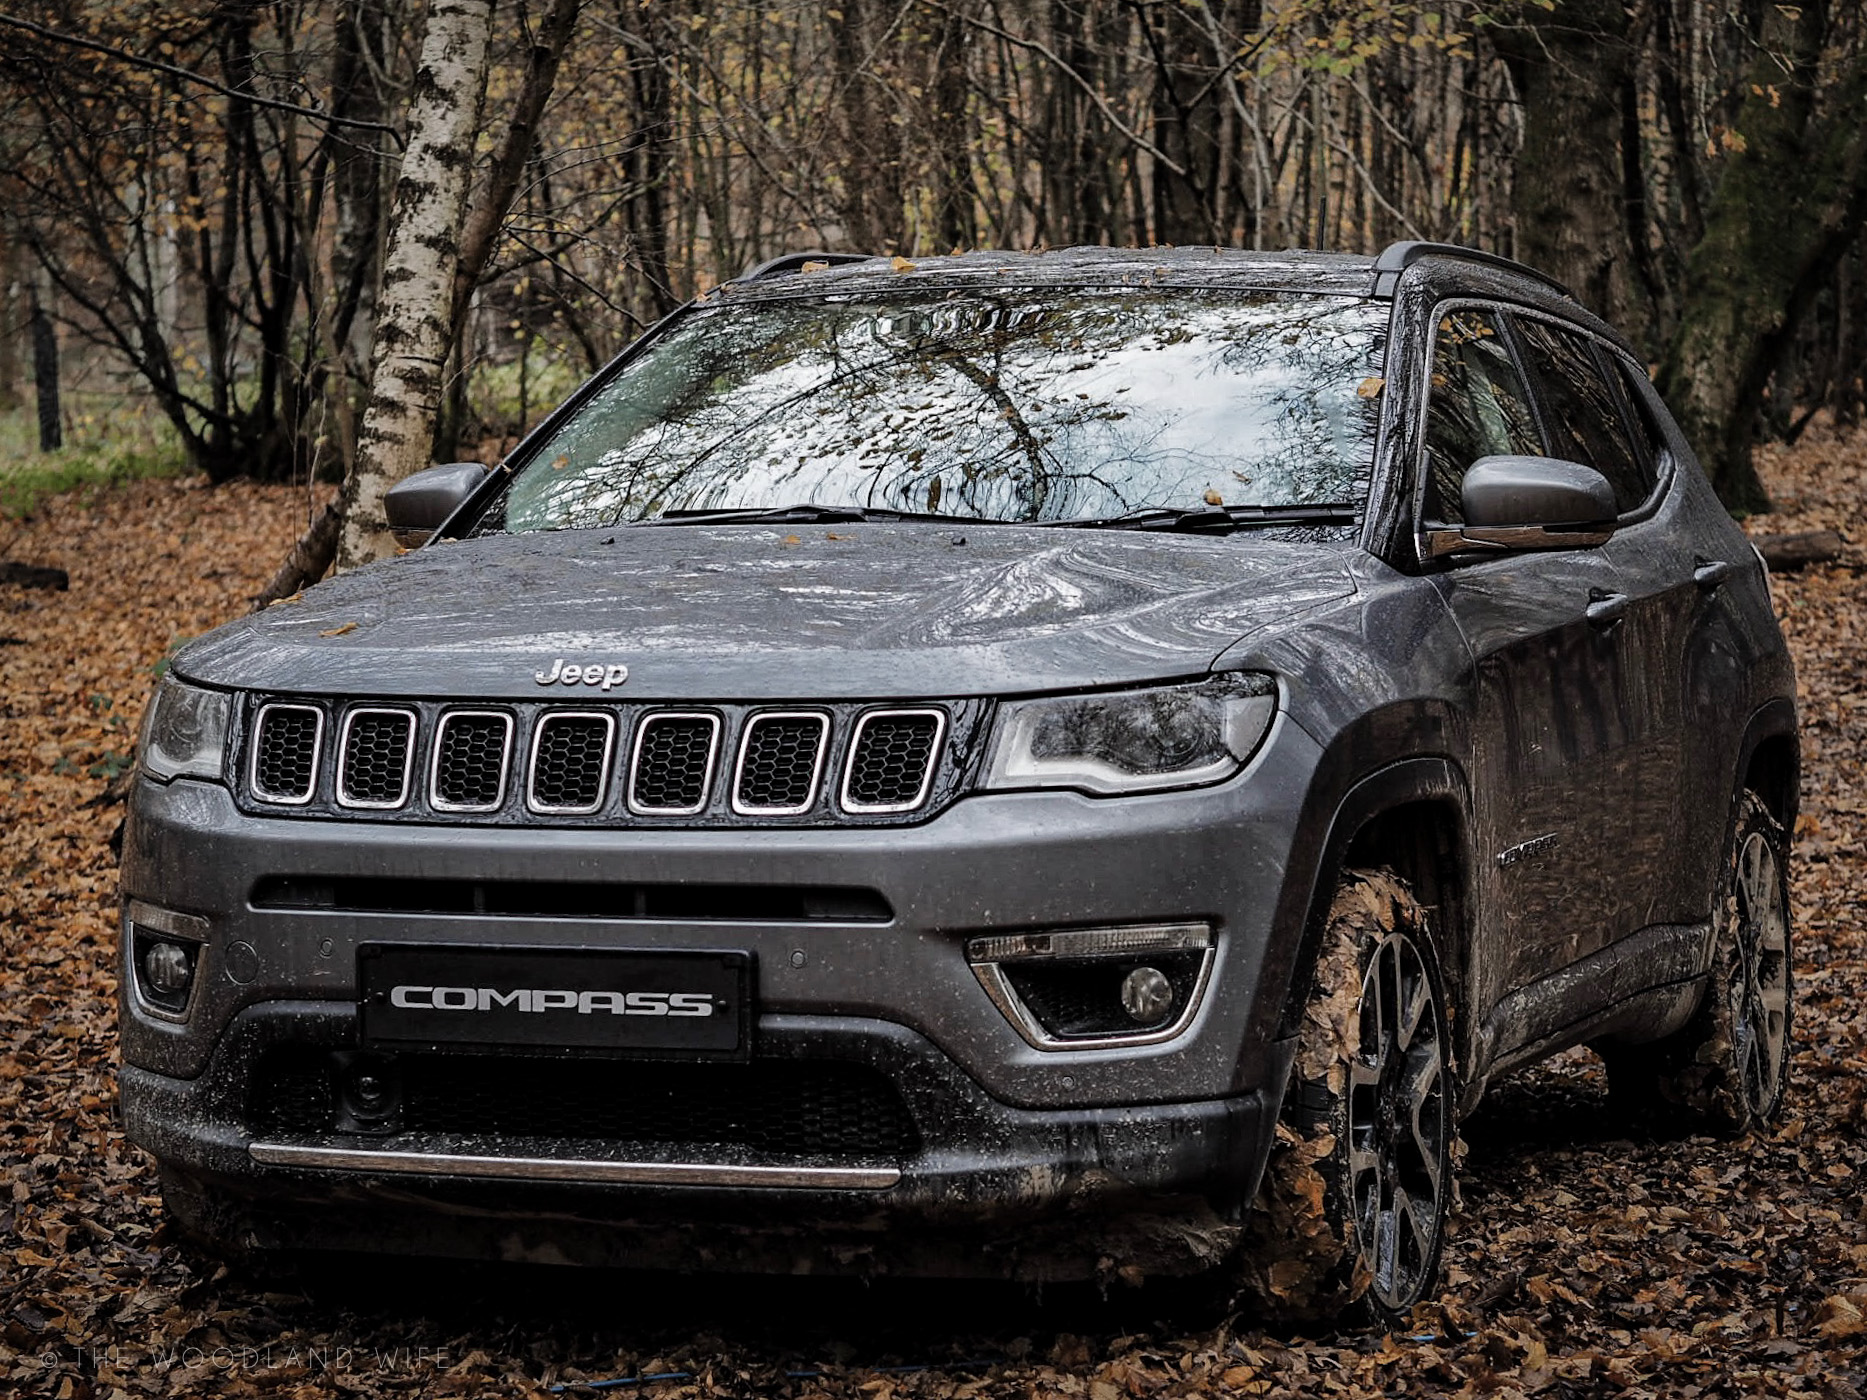 The Woodland Wife - Jeep - All new Jeep Compass 2018 - Recalculating - Lifestyle Launch at Hunter Gather Cook